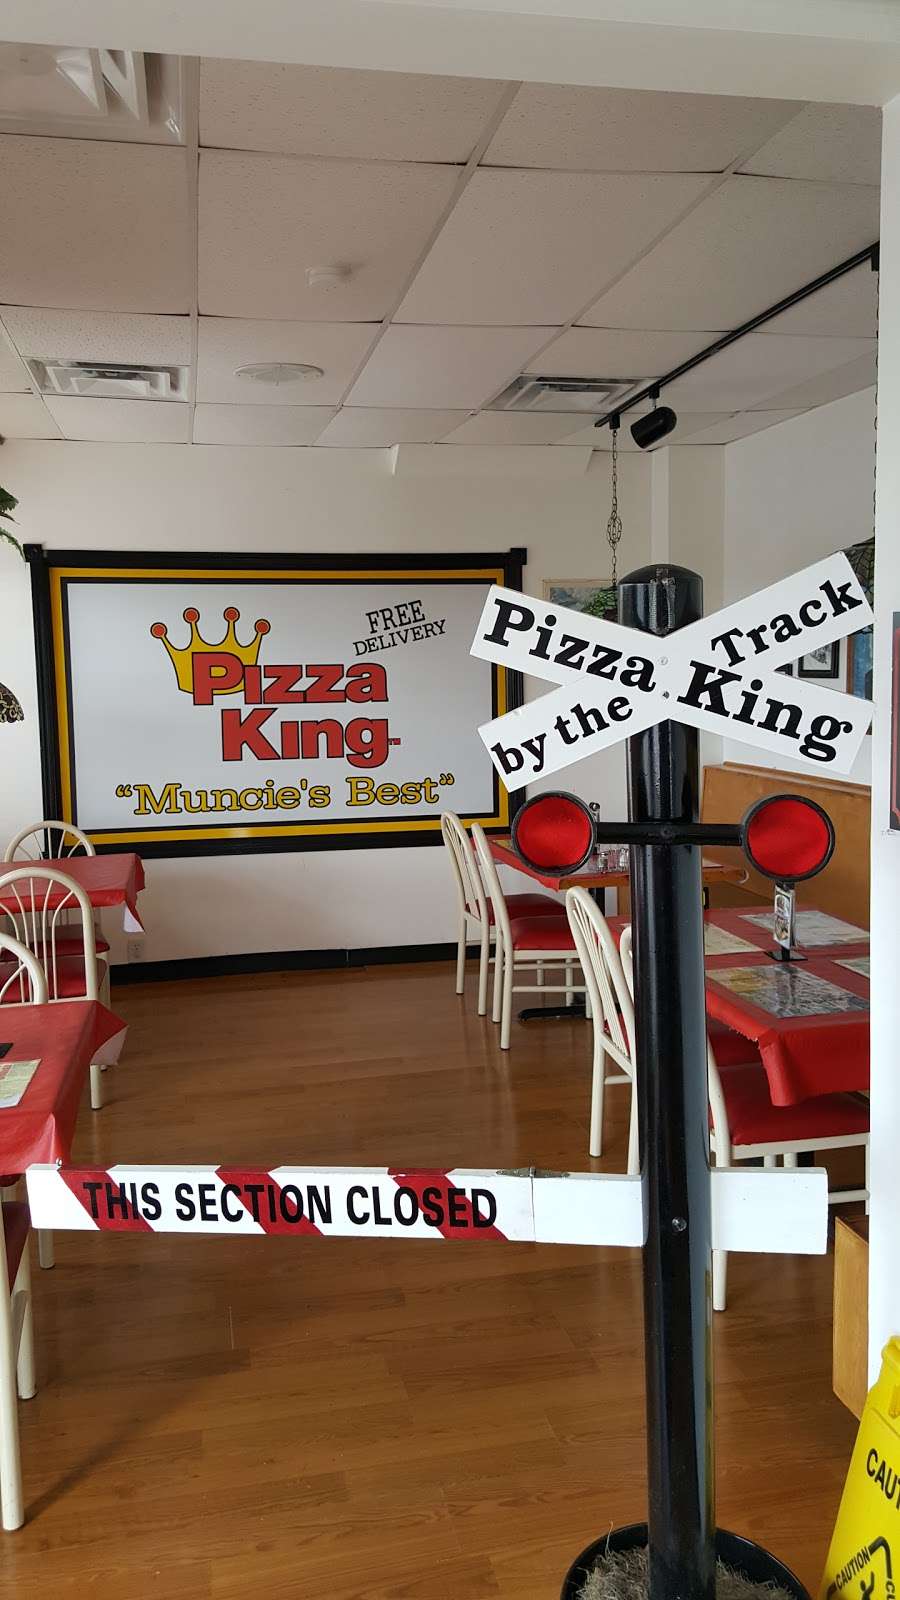 Pizza King | 6550 W Broadway, McCordsville, IN 46055 | Phone: (317) 335-2426